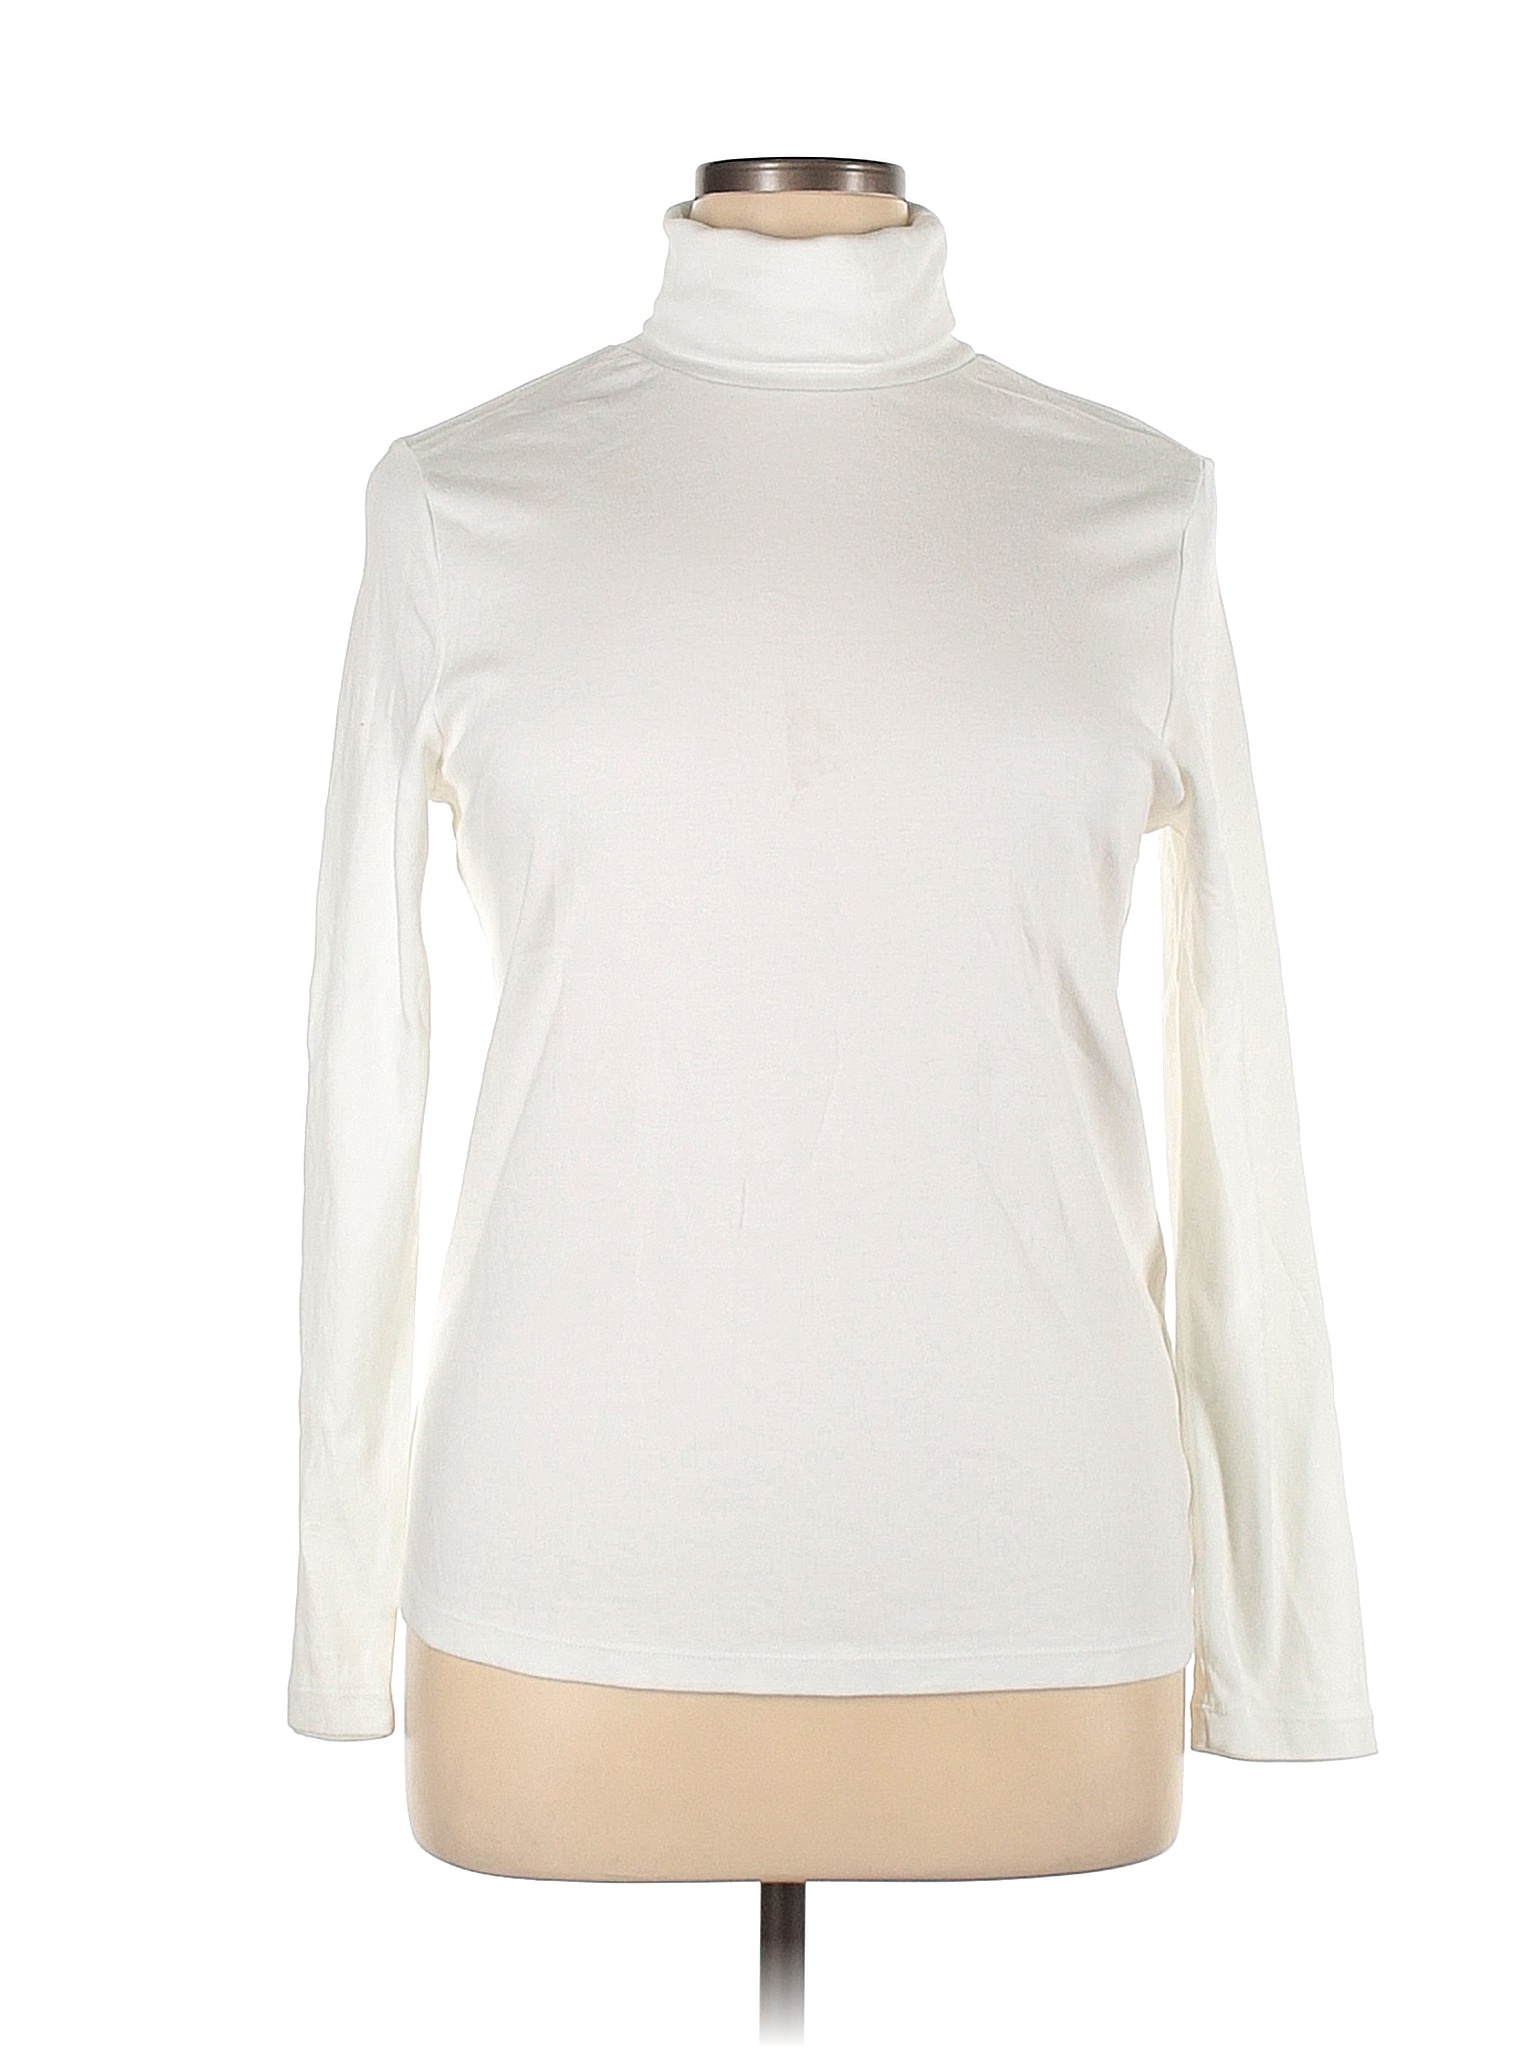 White Stag 100% Cotton Solid White Long Sleeve Turtleneck Size XL - 47% ...